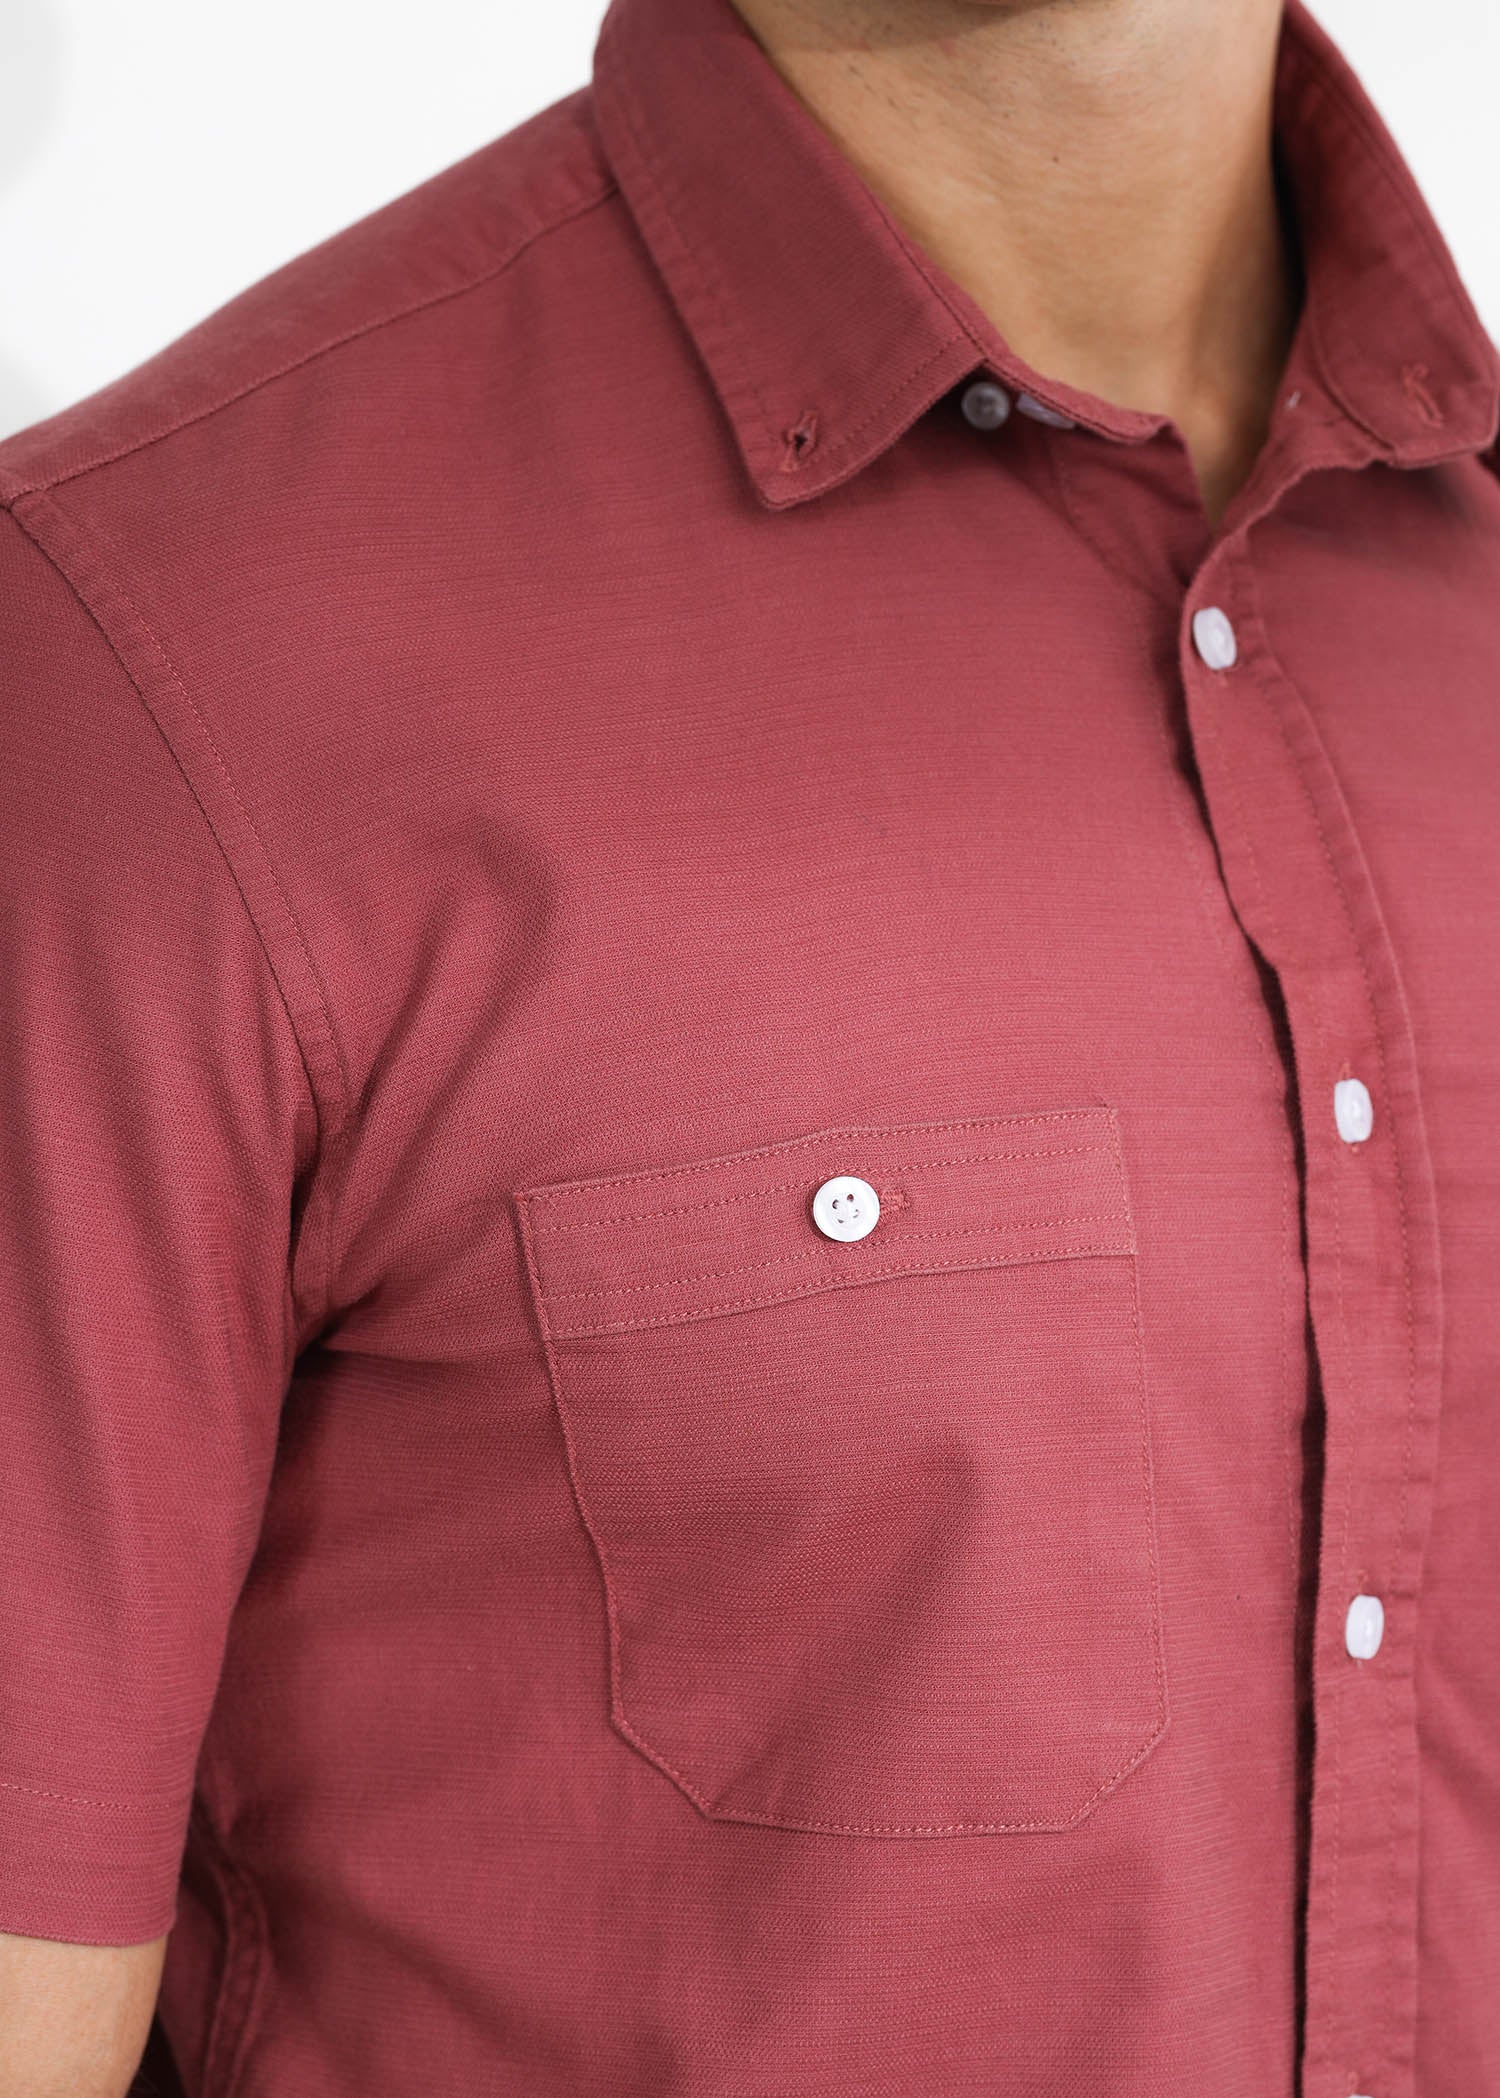 Casual Detail S/S Shirt